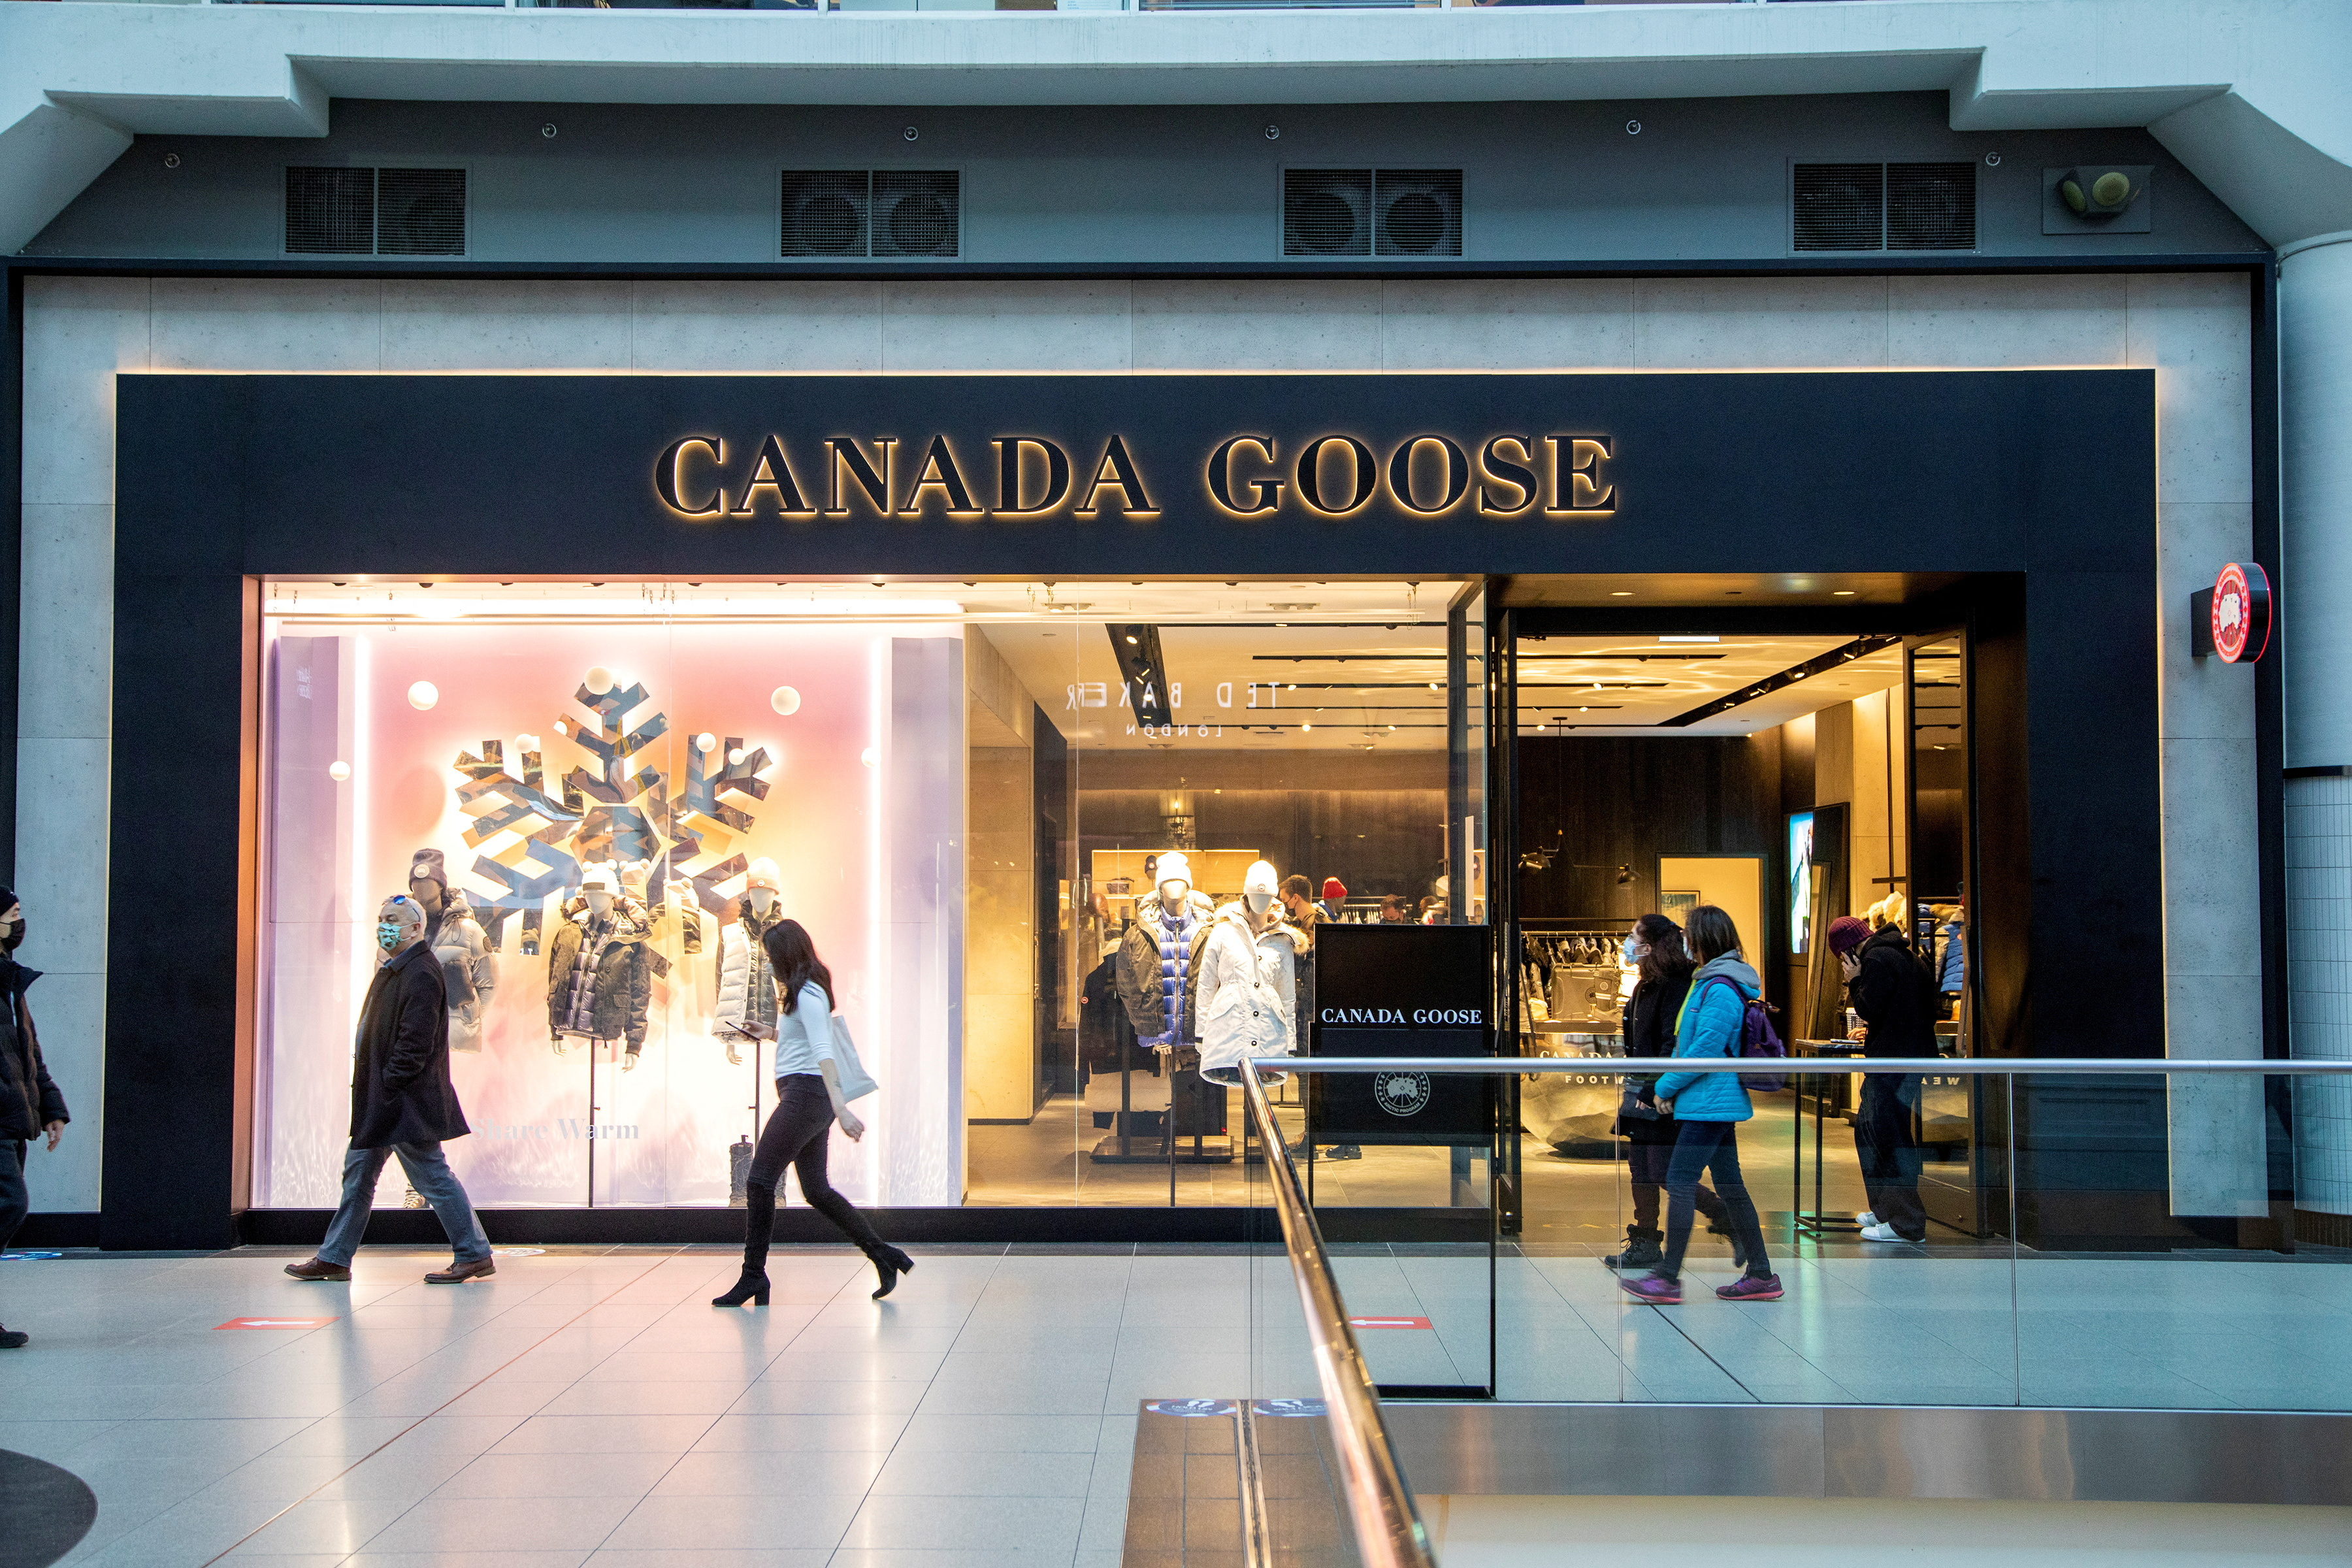 A Canada Goose store in Toronto